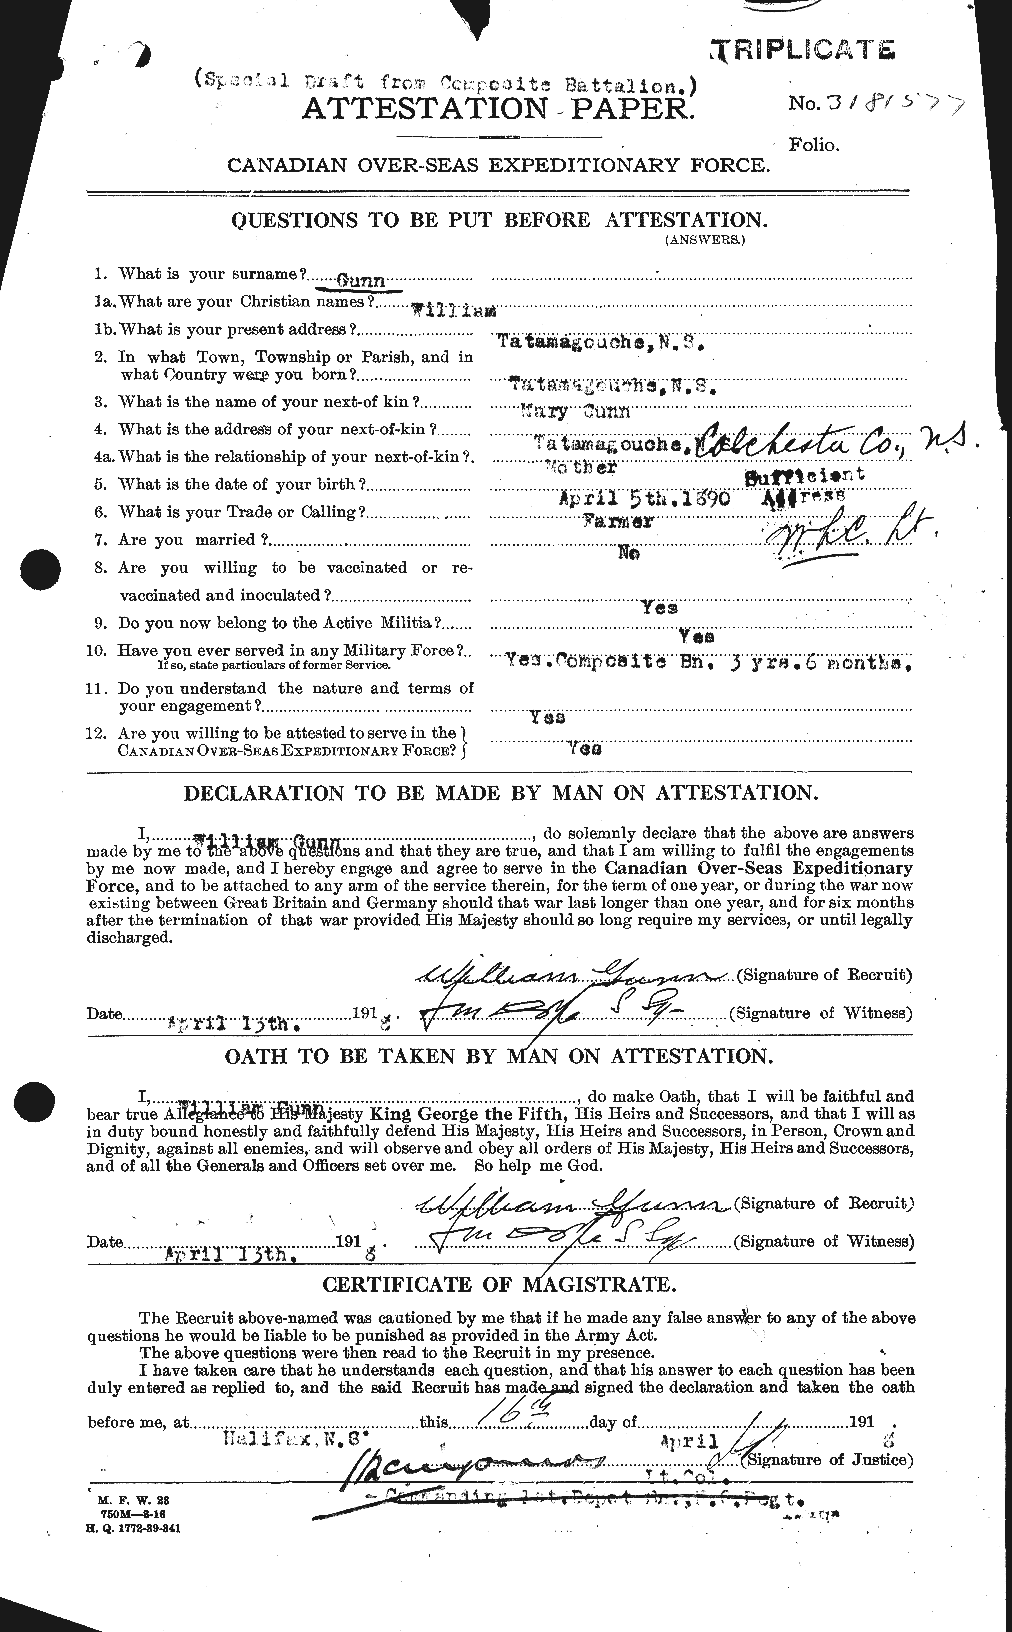 Personnel Records of the First World War - CEF 369349a